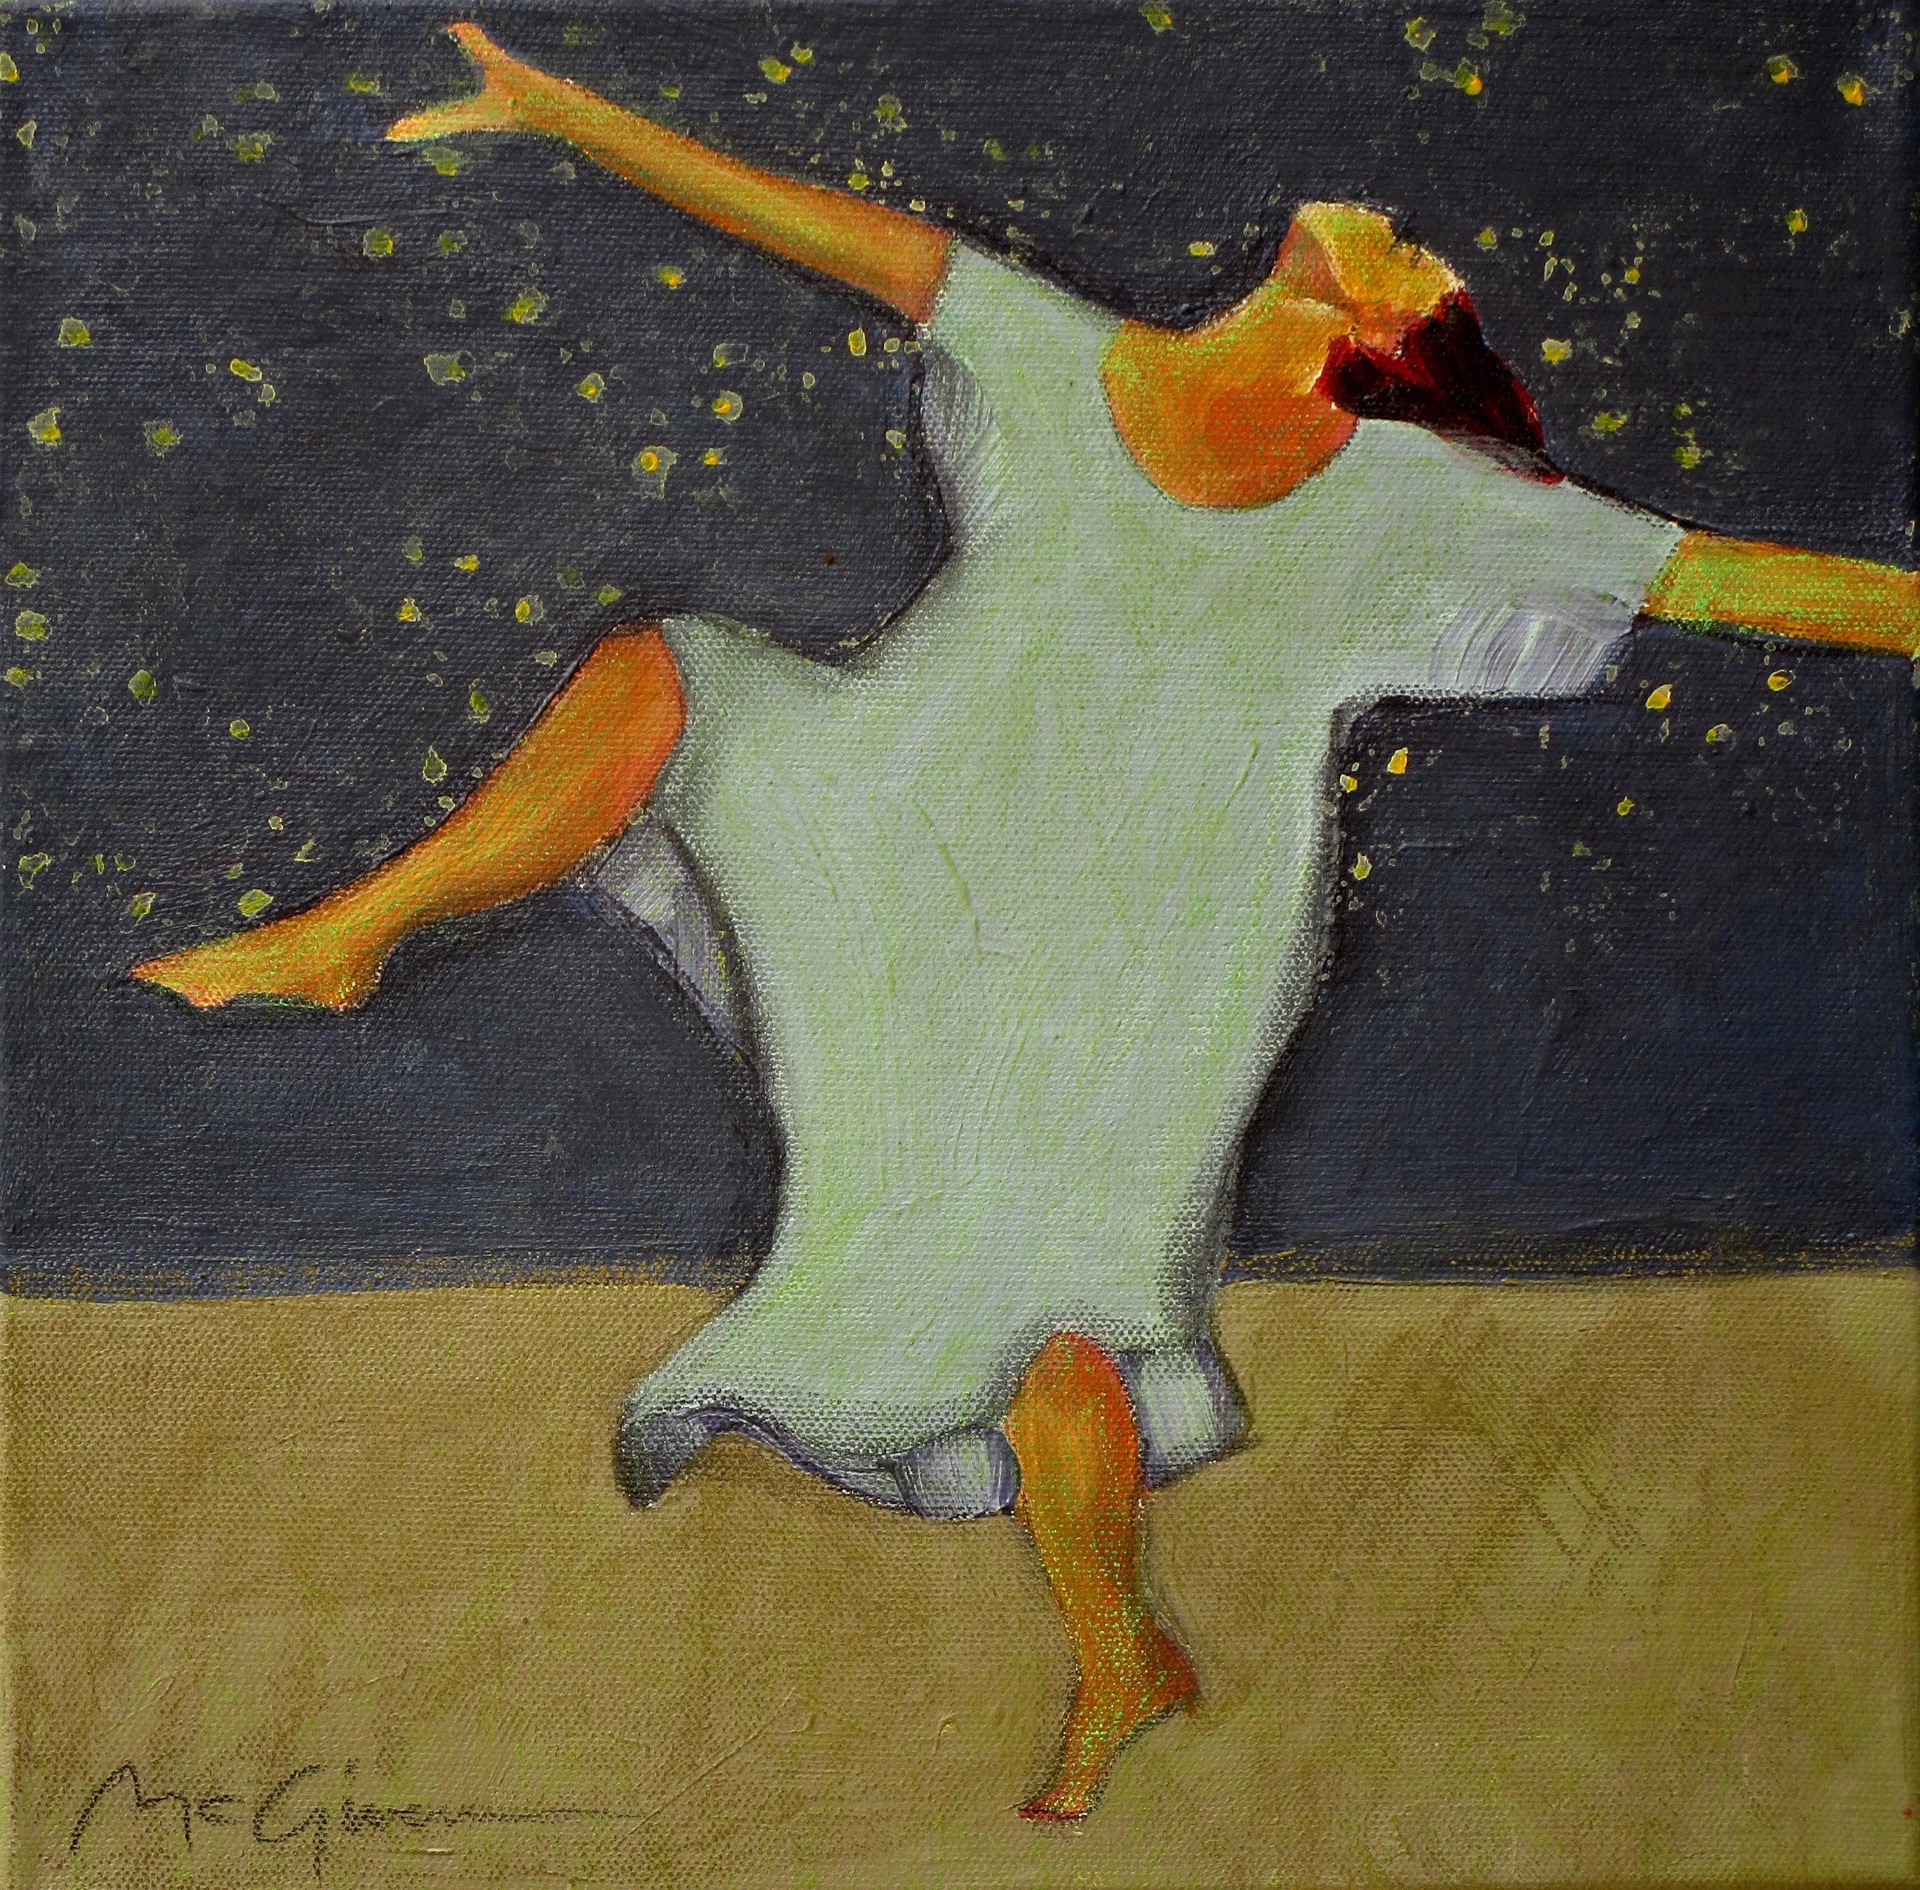 Starlight by Peggy McGivern